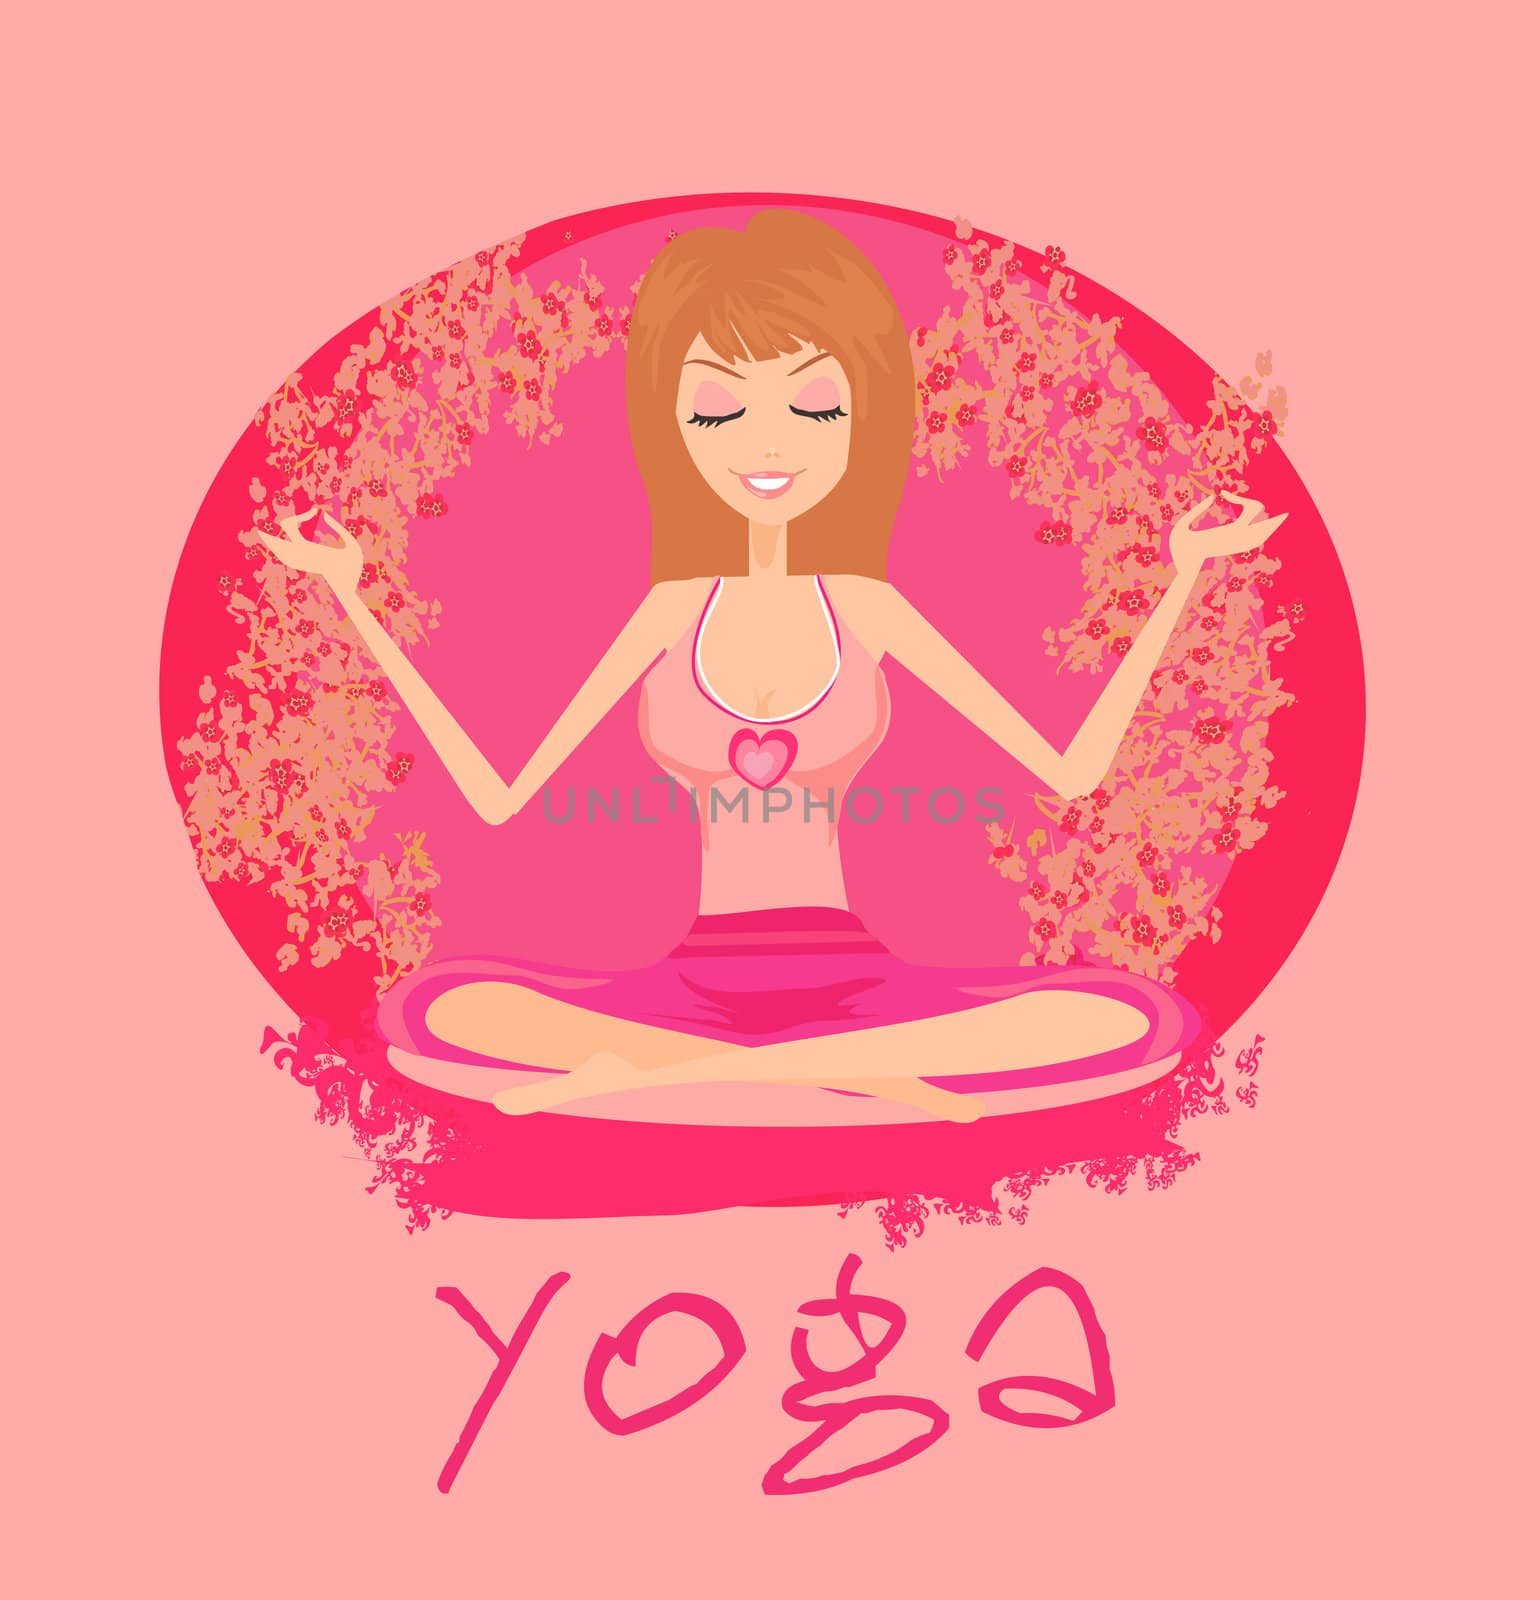 Yoga girl in lotus position by JackyBrown